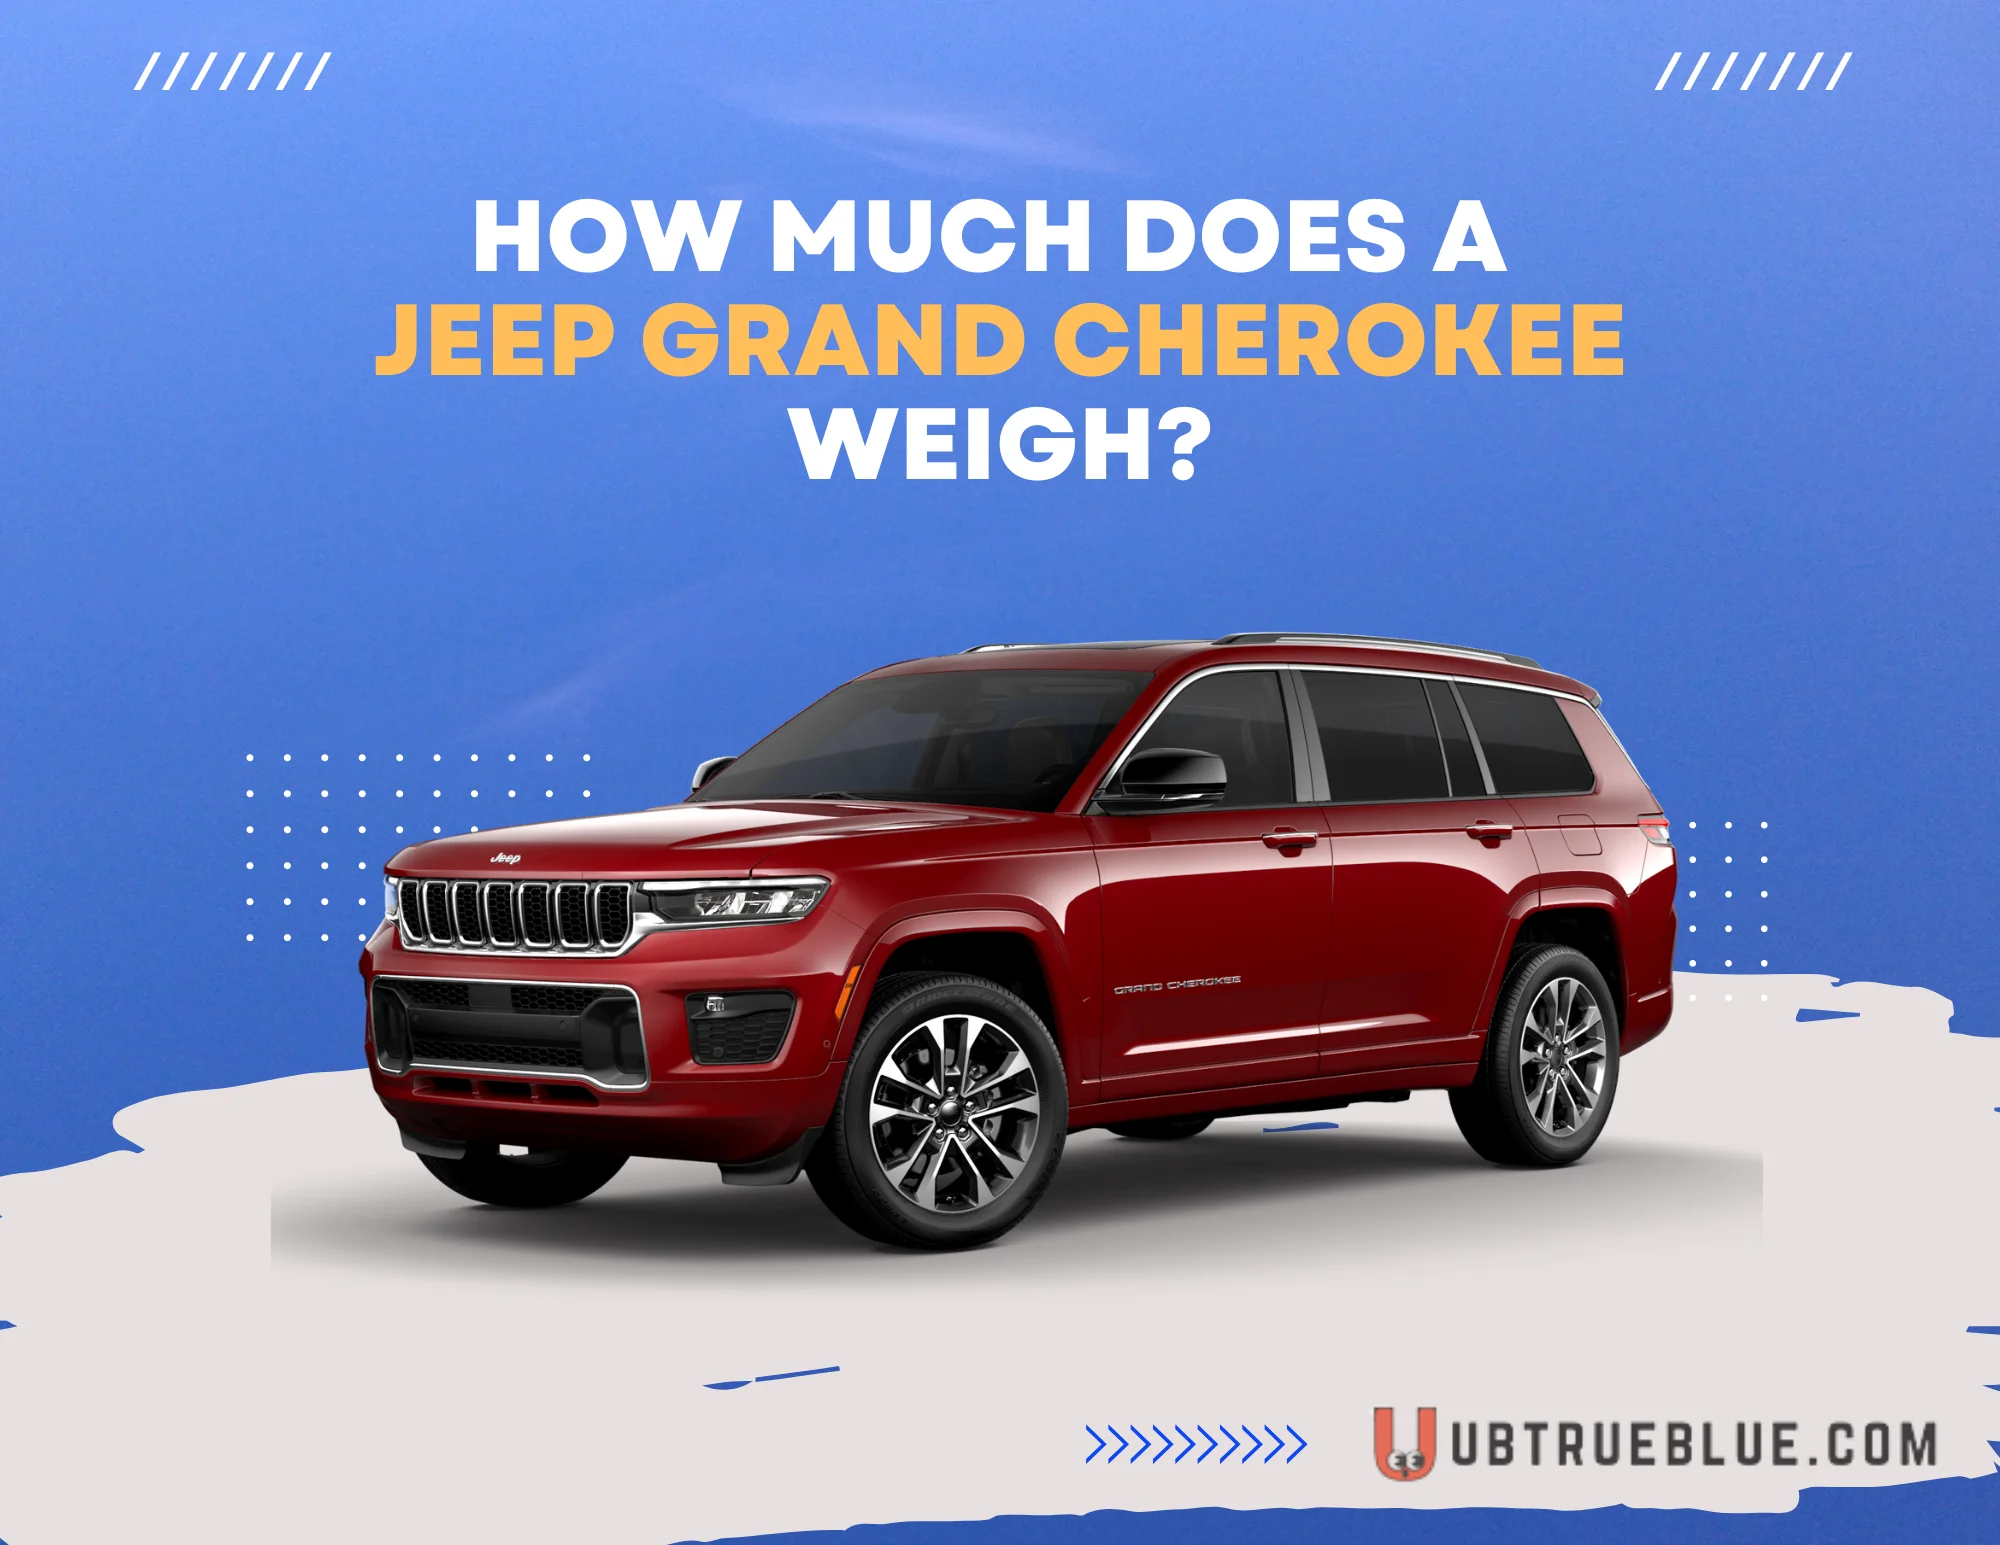 How Much Does A Jeep Grand Cherokee Weigh On Ubtrueblue Automotive Weigh: Light Or Heavy? Cost 2023 Weight Width With Mirrors In Tons Gross  Full